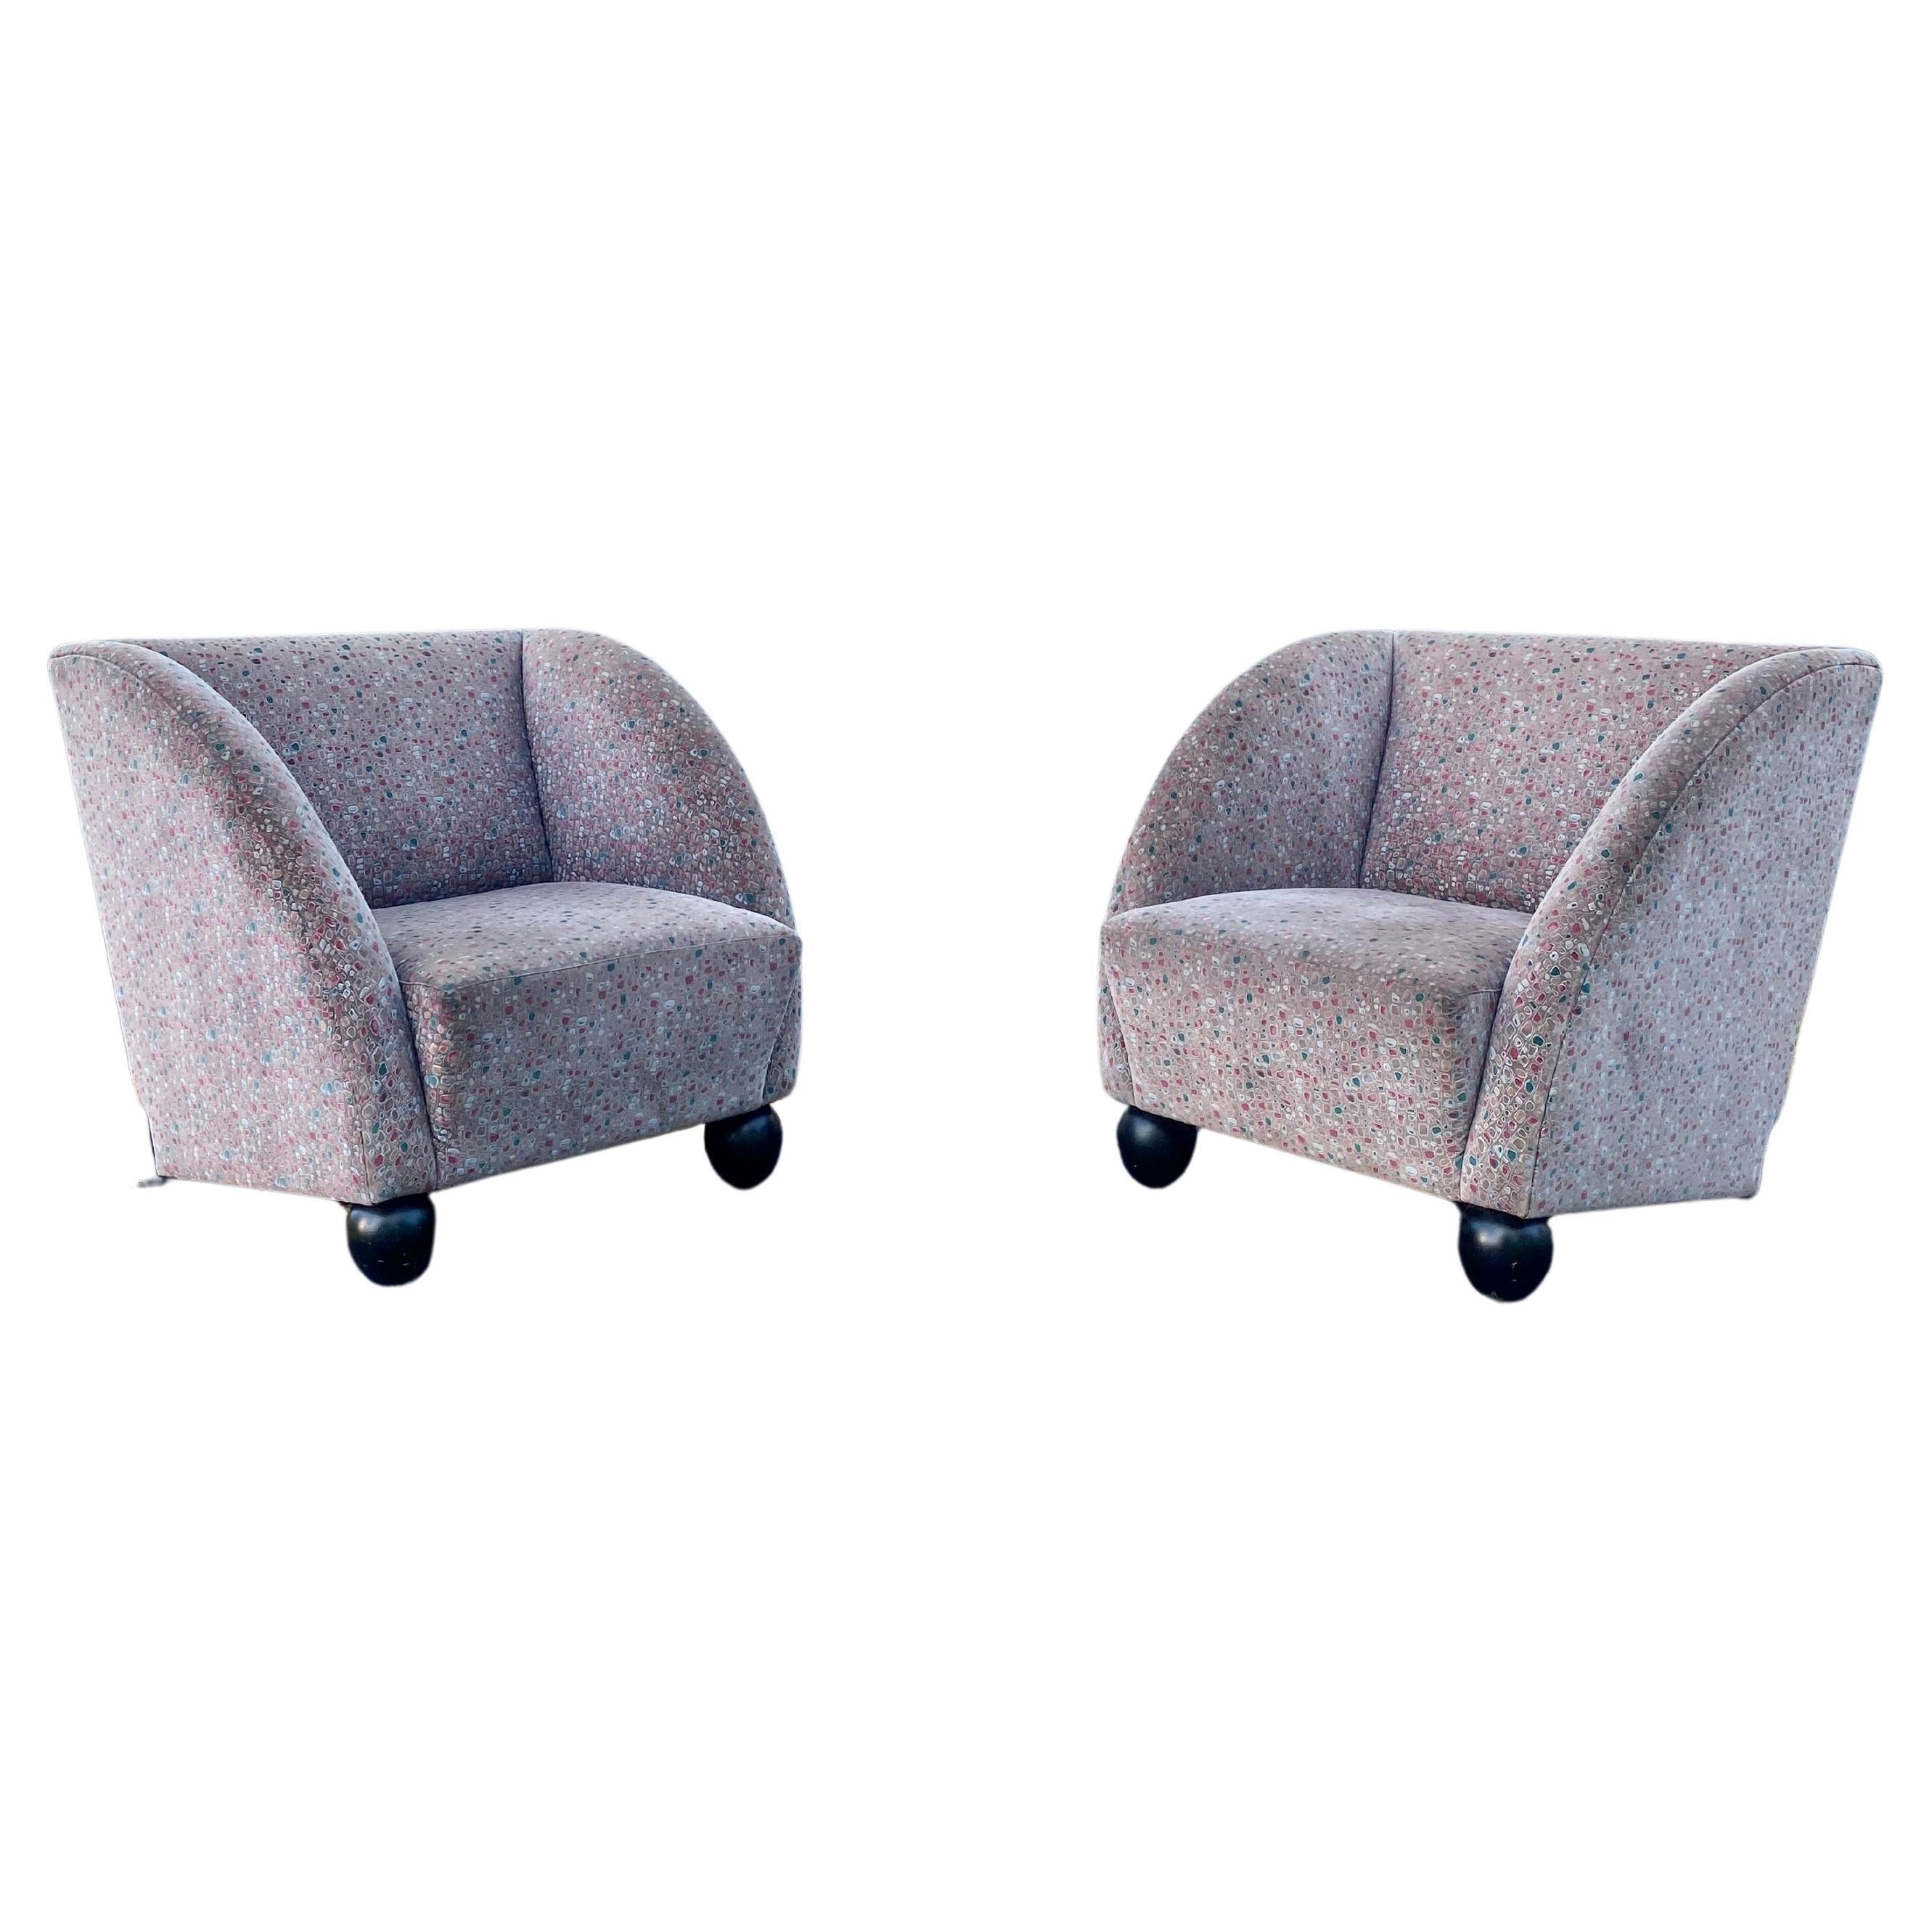 1930s Art Deco Sculptural Club Chairs, Set of 2 For Sale